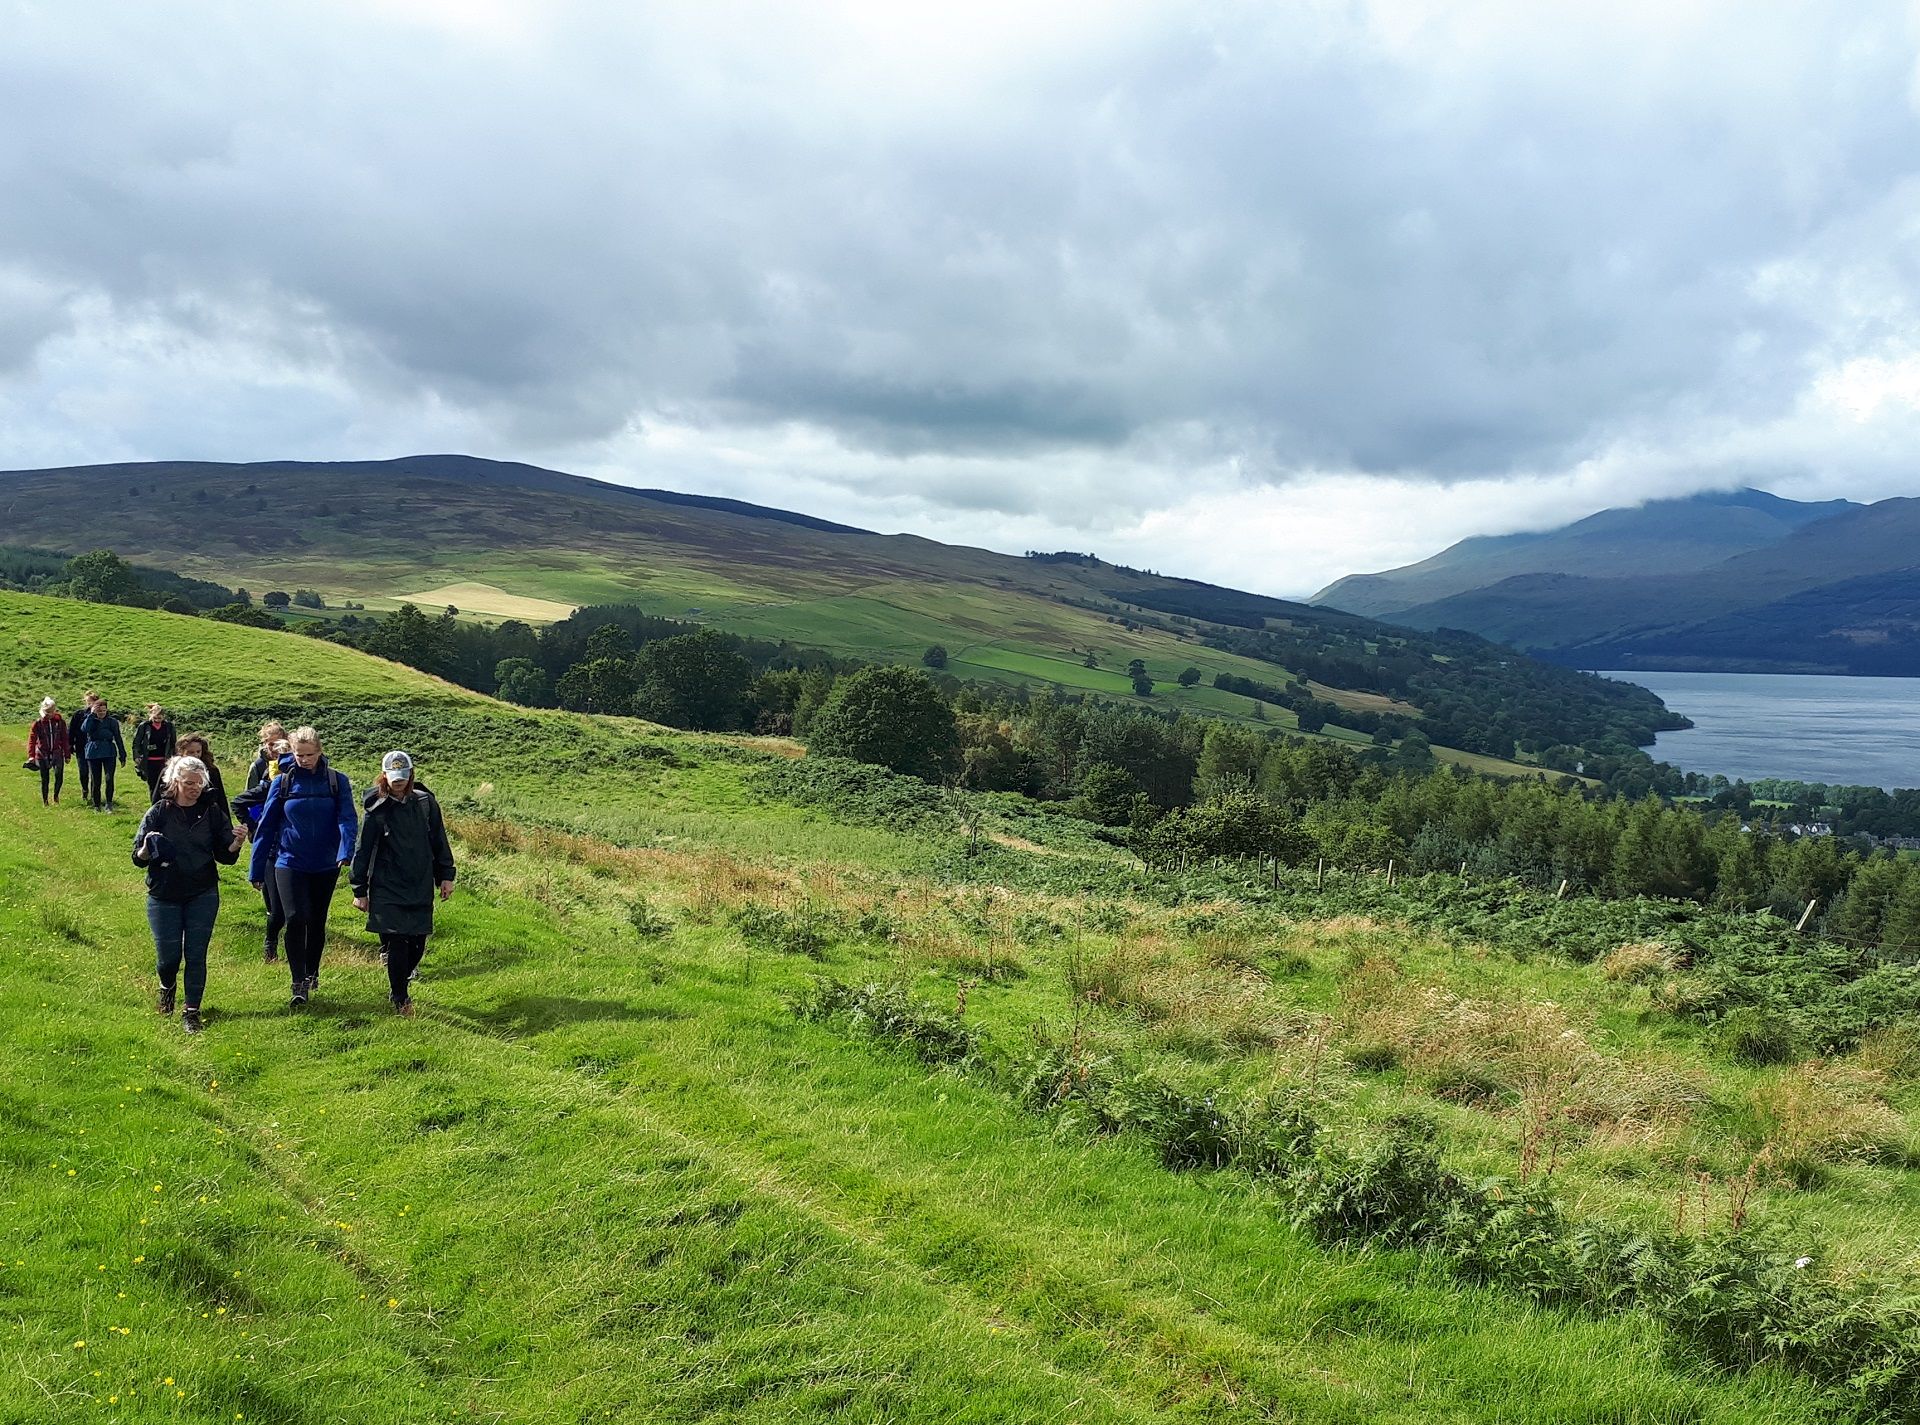 Queen's Drive above Loch Tay (c) Perthshire Treks